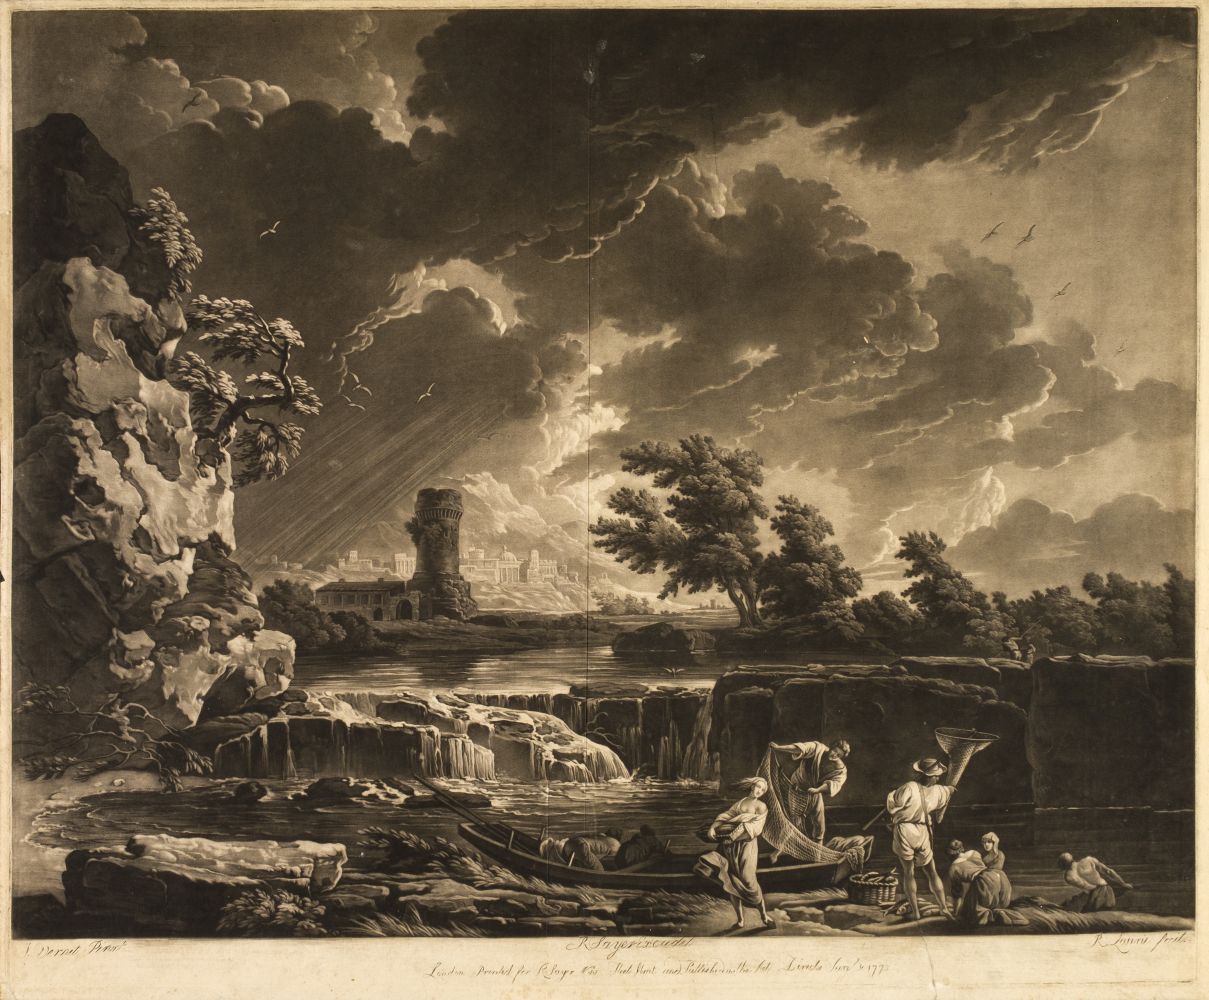 * Laurie (Robert) Landscape with storm and fishermen by the river and others